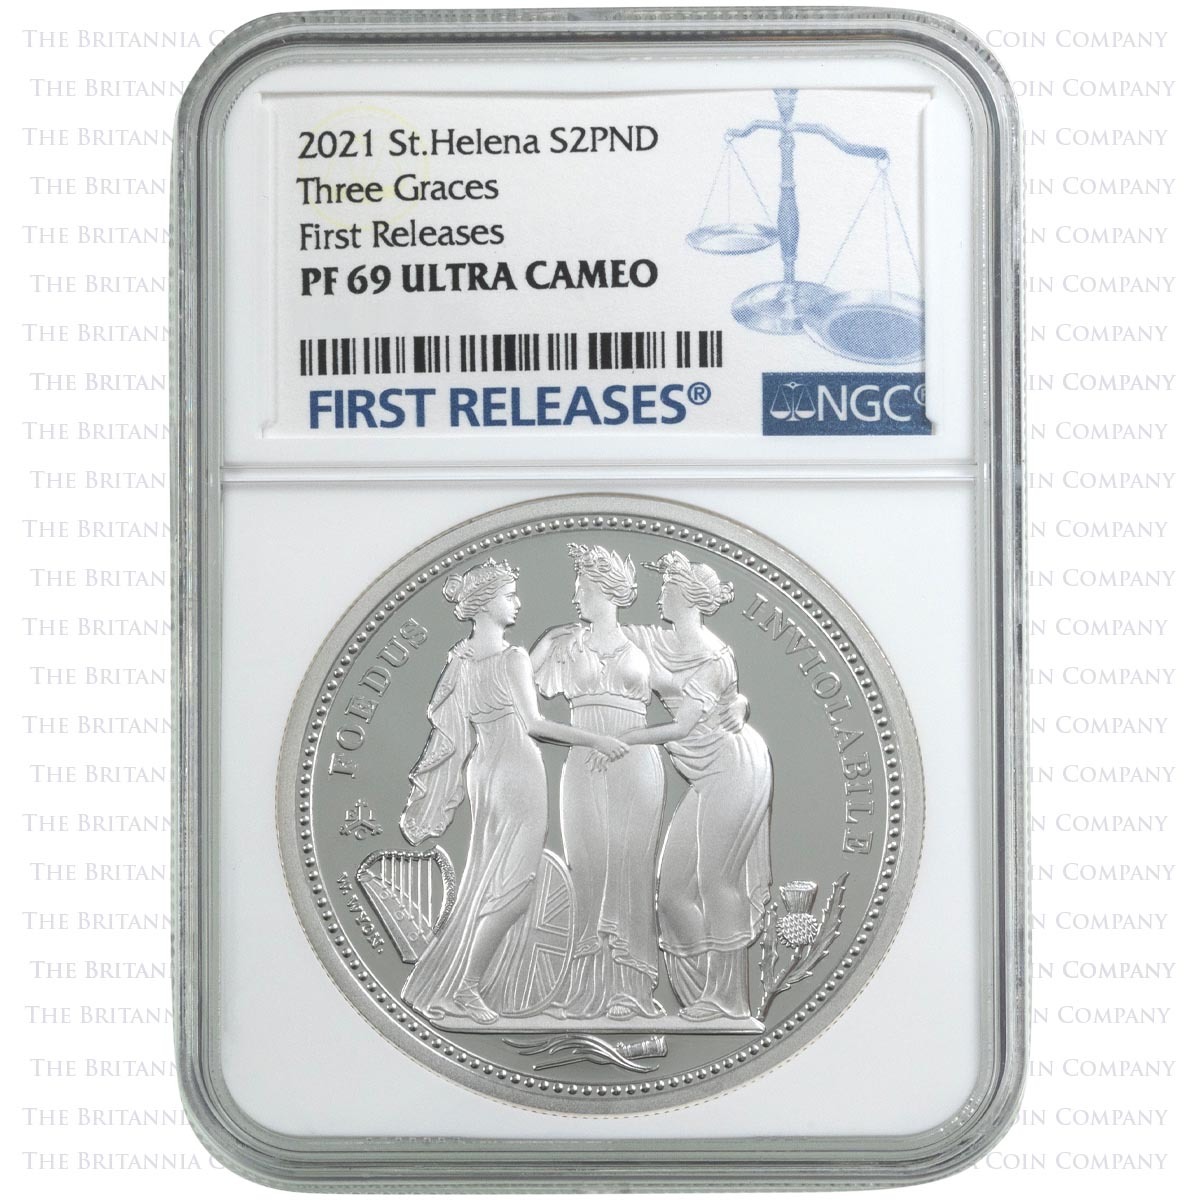 2021 St Helena Saint Helena Three Graces Two Ounce Silver Proof Coin NGC Graded PF 69 Ultra Cameo First Releases Holder